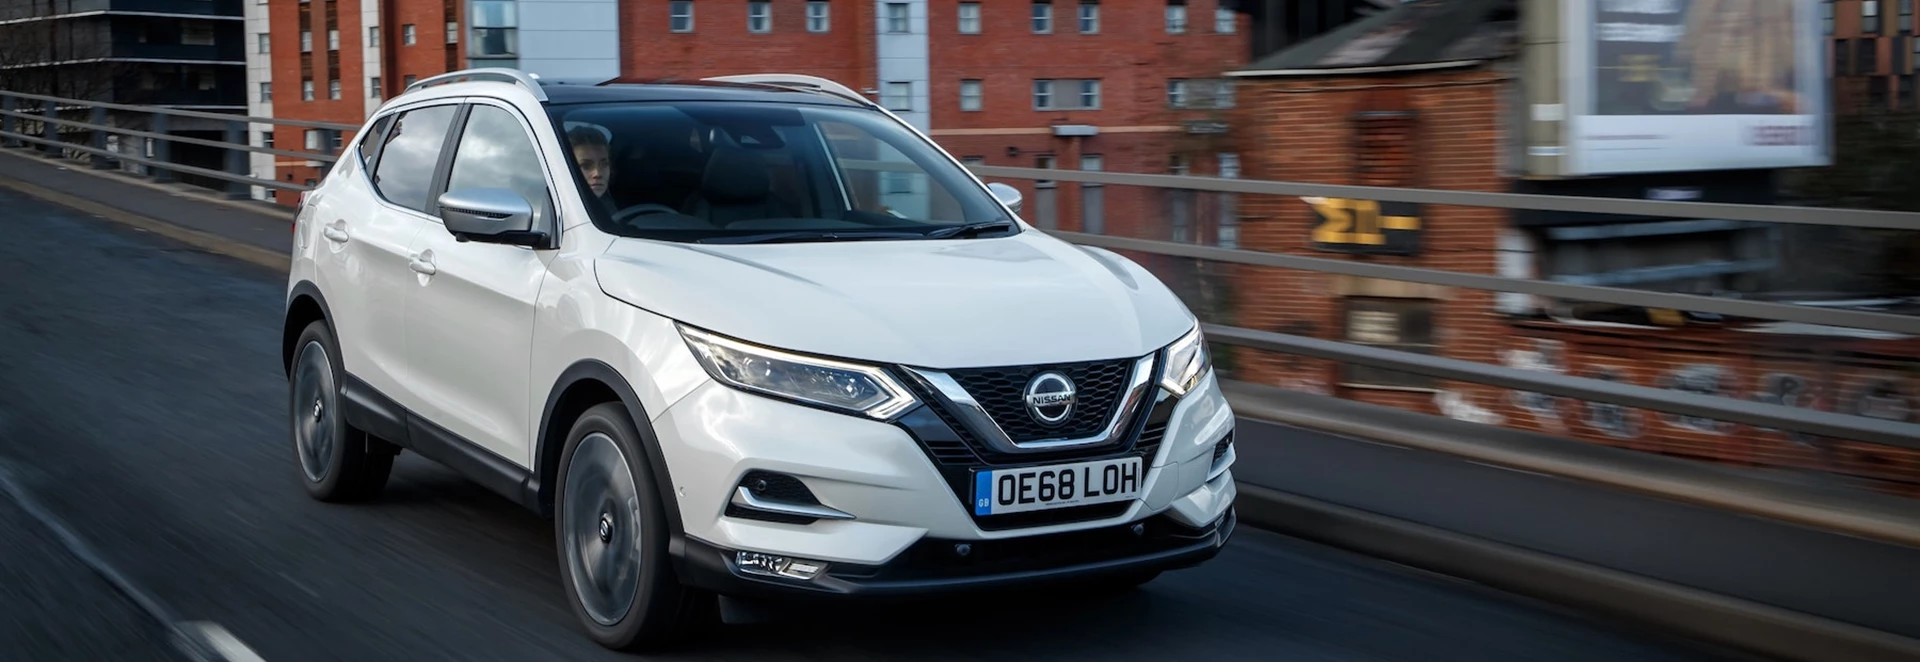 Why is the Nissan Qashqai so popular with UK car buyers?